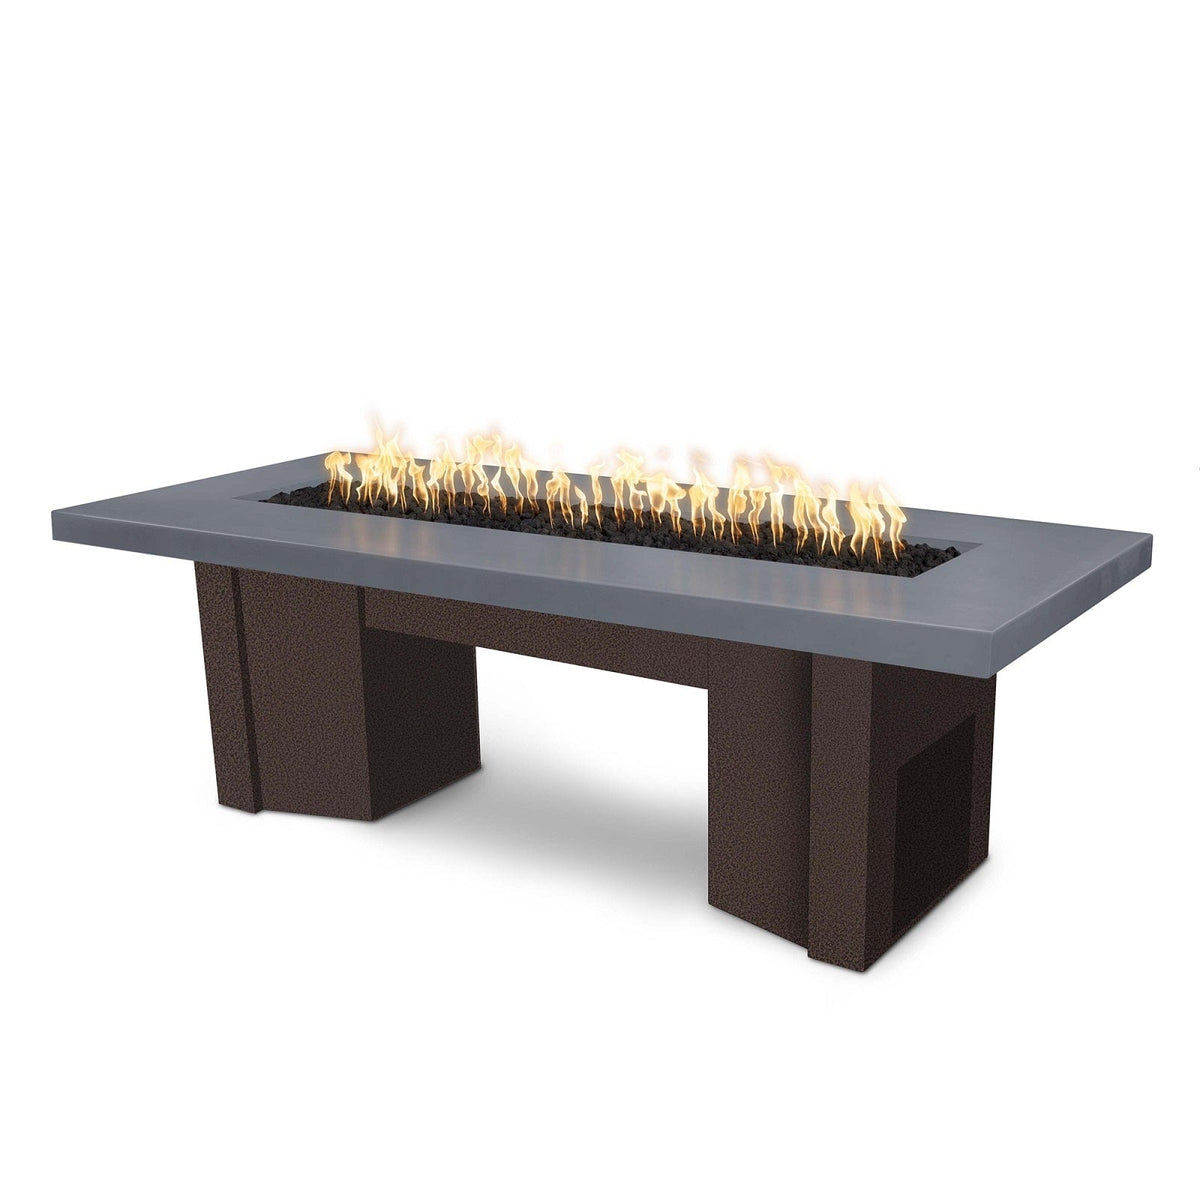 The Outdoor Plus Fire Features Gray (-GRY) / Copper Vein Powder Coated Steel (-CPV) The Outdoor Plus 78&quot; Alameda Fire Table Smooth Concrete in Natural Gas - Flame Sense System with Push Button Spark Igniter / OPT-ALMGFRC78FSEN-NG